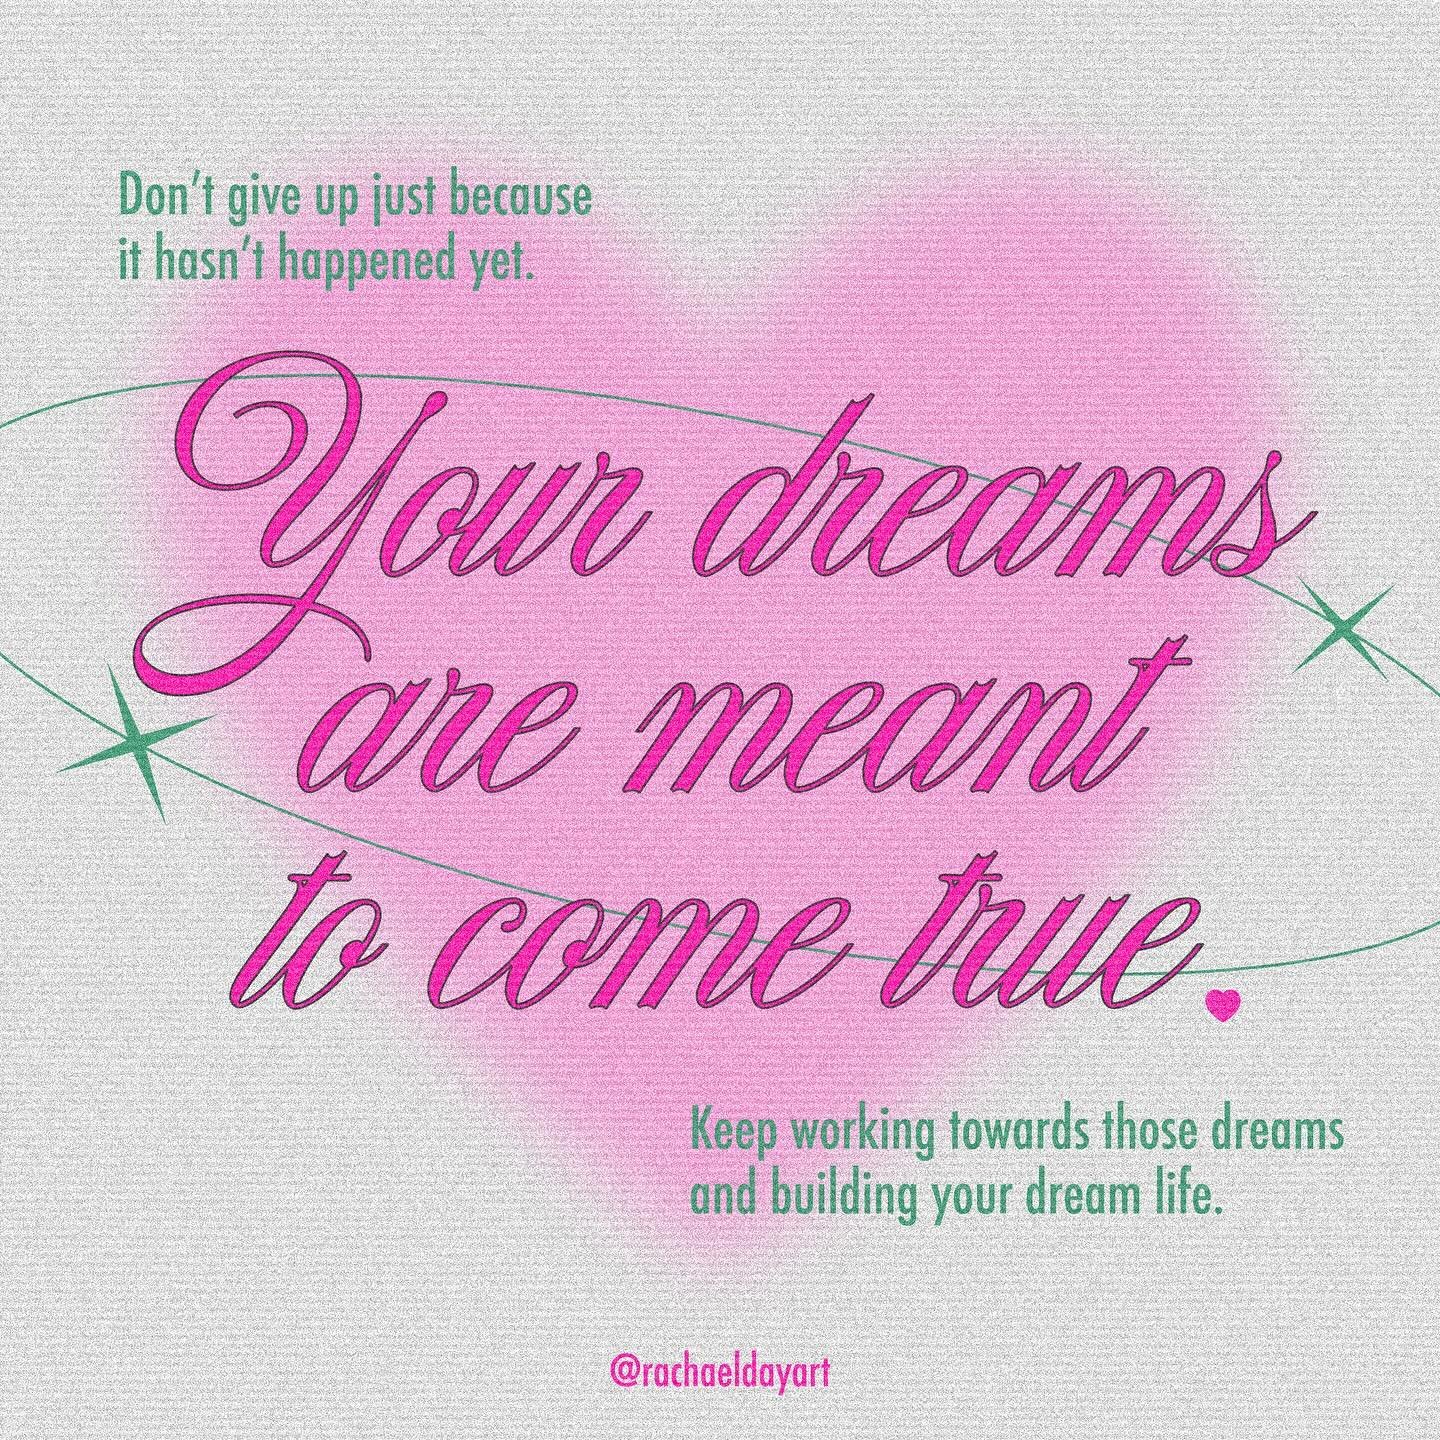 Those dreams of yours are meant to happen. 💫 Share a dream/life goal that you're brewing in the comments. I would love to know what everyone's dreaming of! 🥰